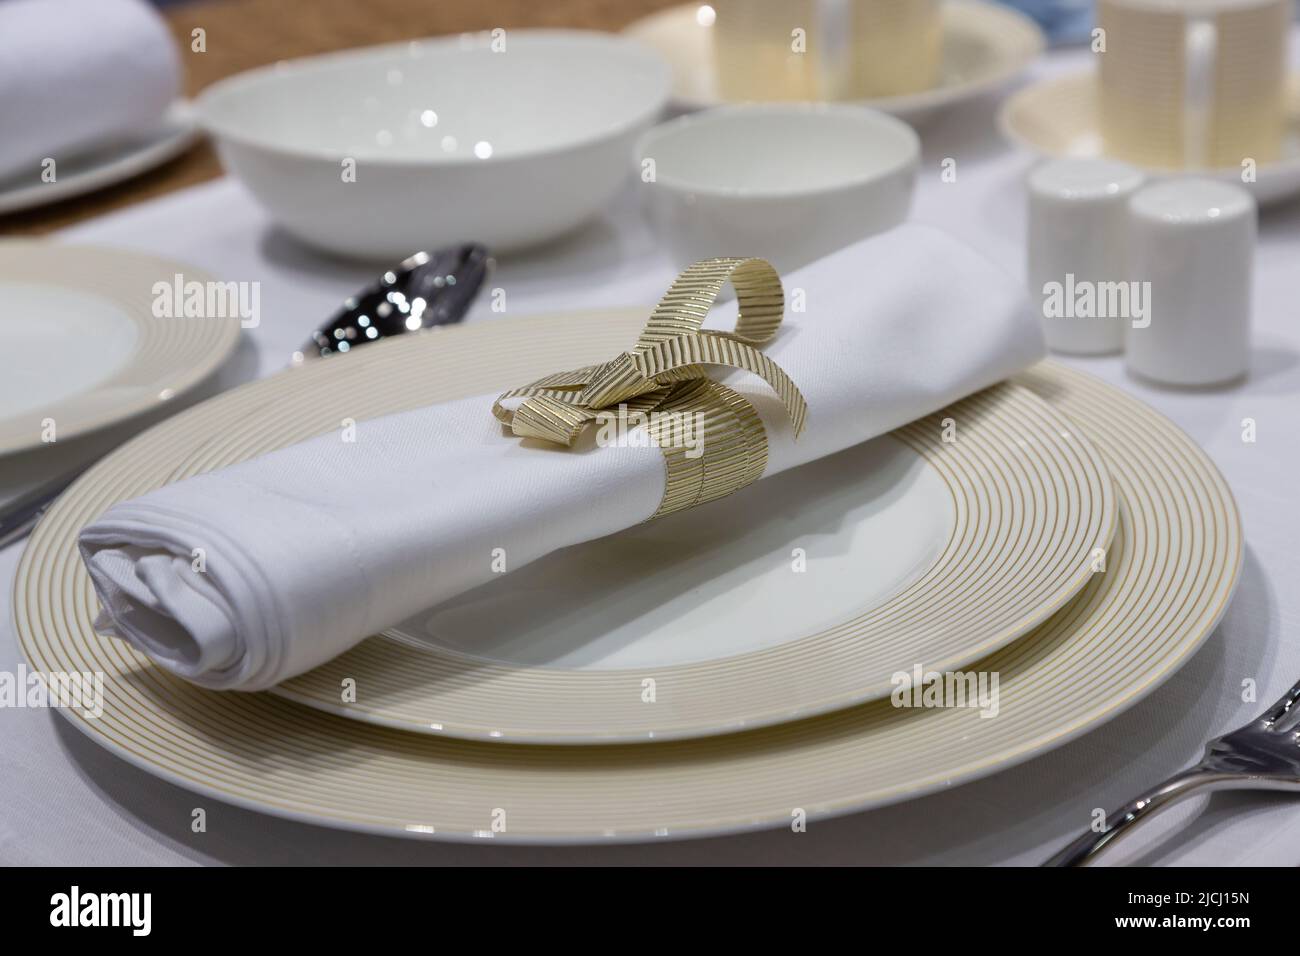 table setting with crockery and napkin Stock Photo